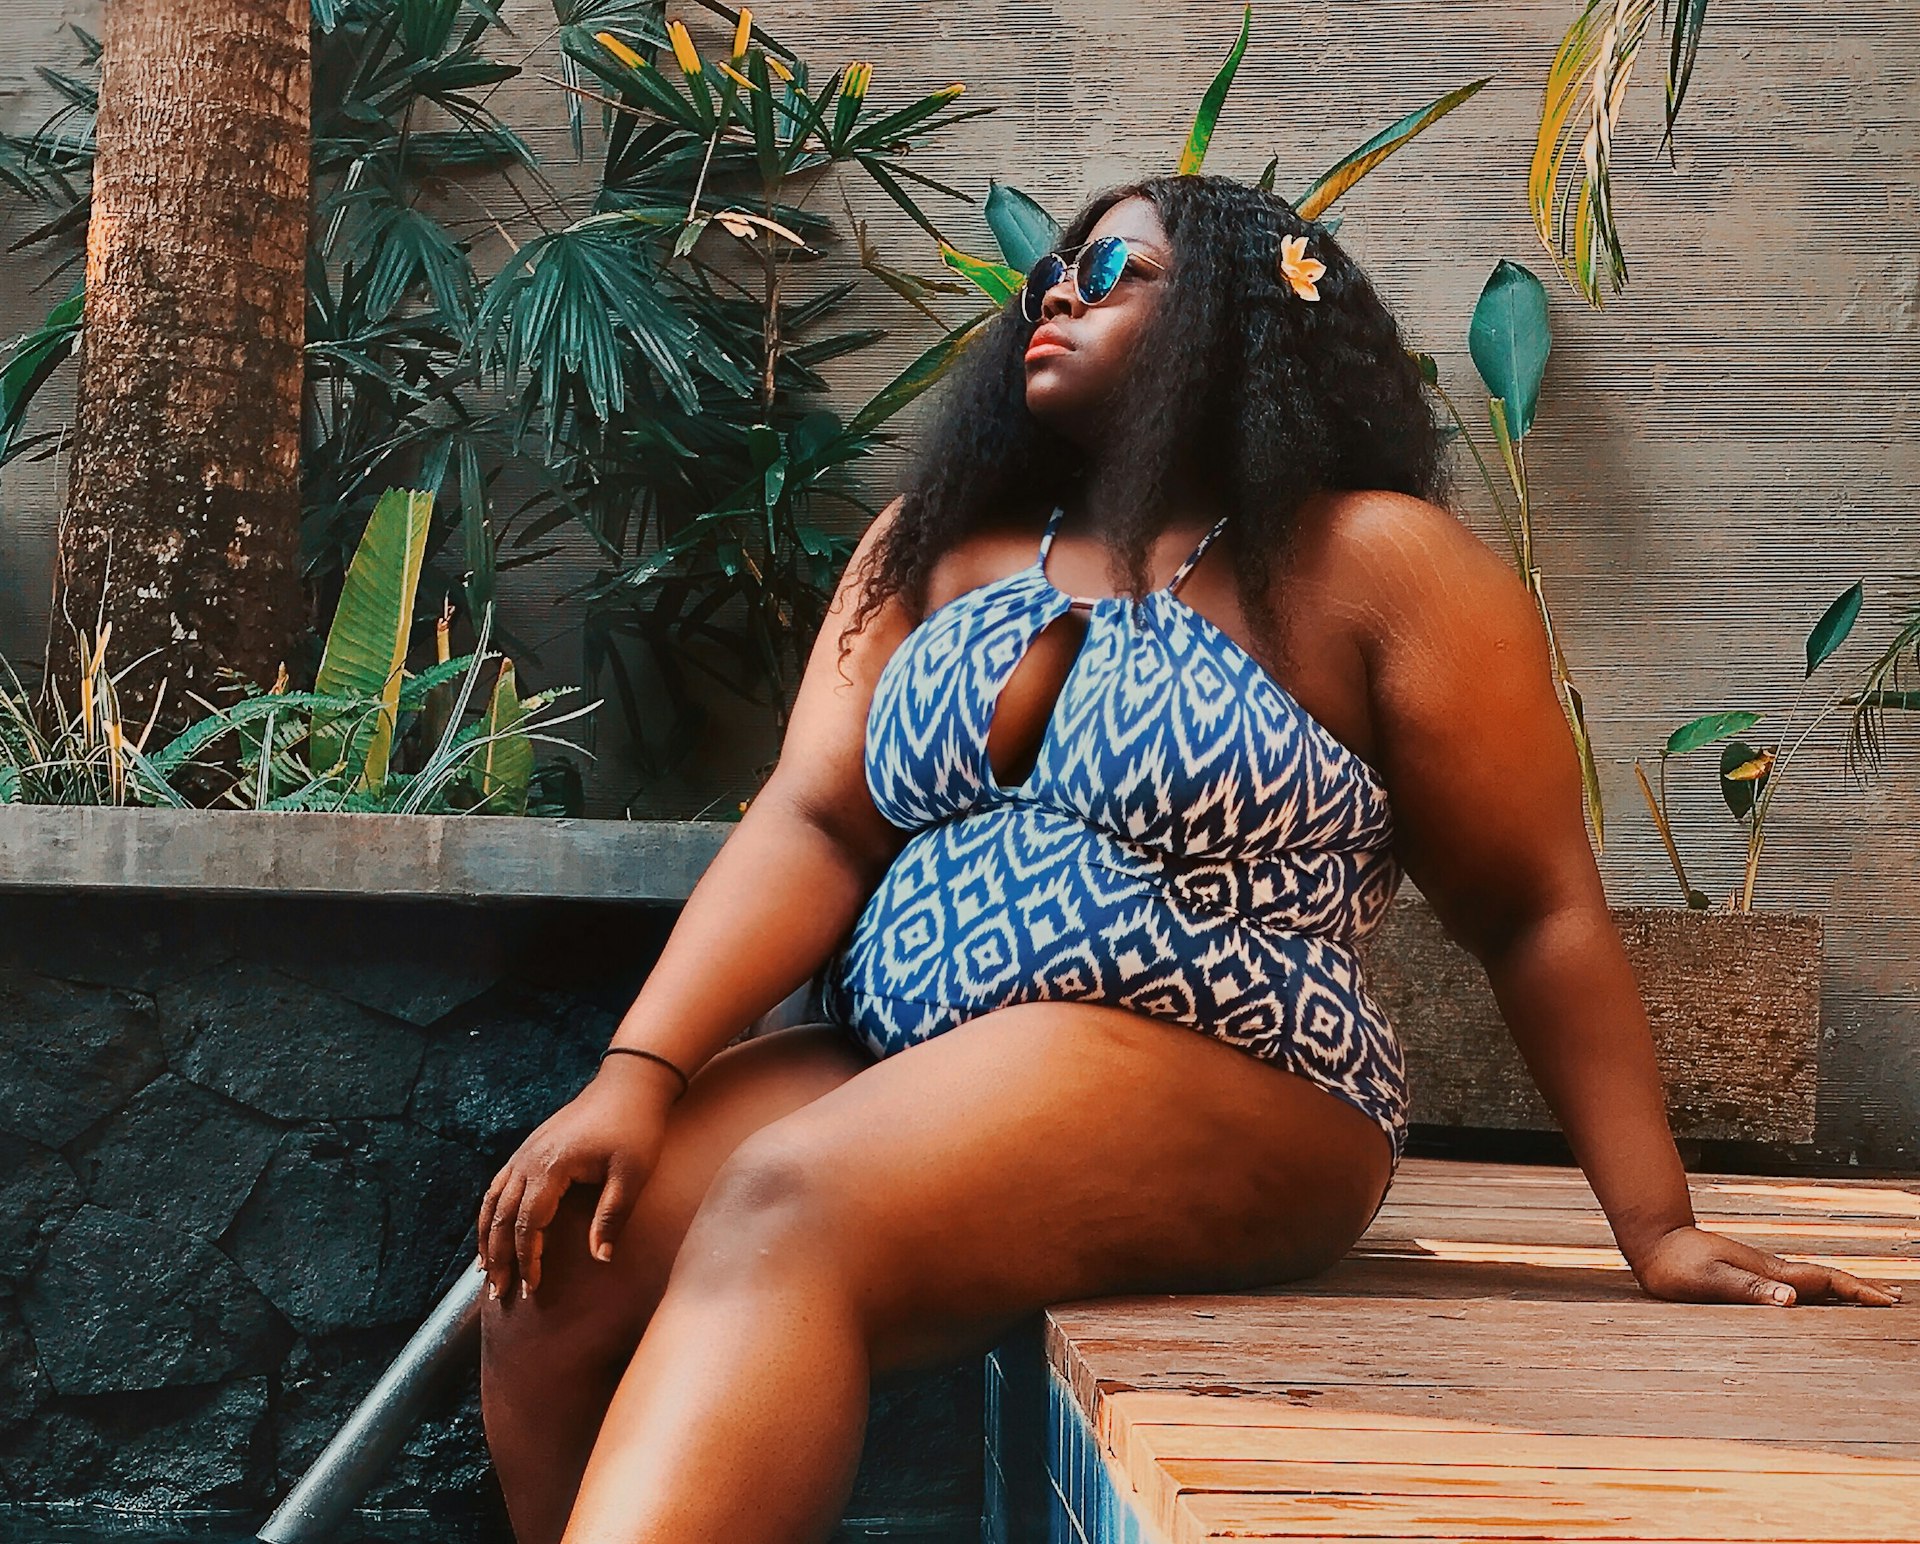 Writer Stephanie Yeboah relaxes by a pool in a blue-and-white patterned swimsuit and blue-lens sunglasses. There are palm-like trees in the background and she is sitting on a wooden deck with her feet dangling in the water